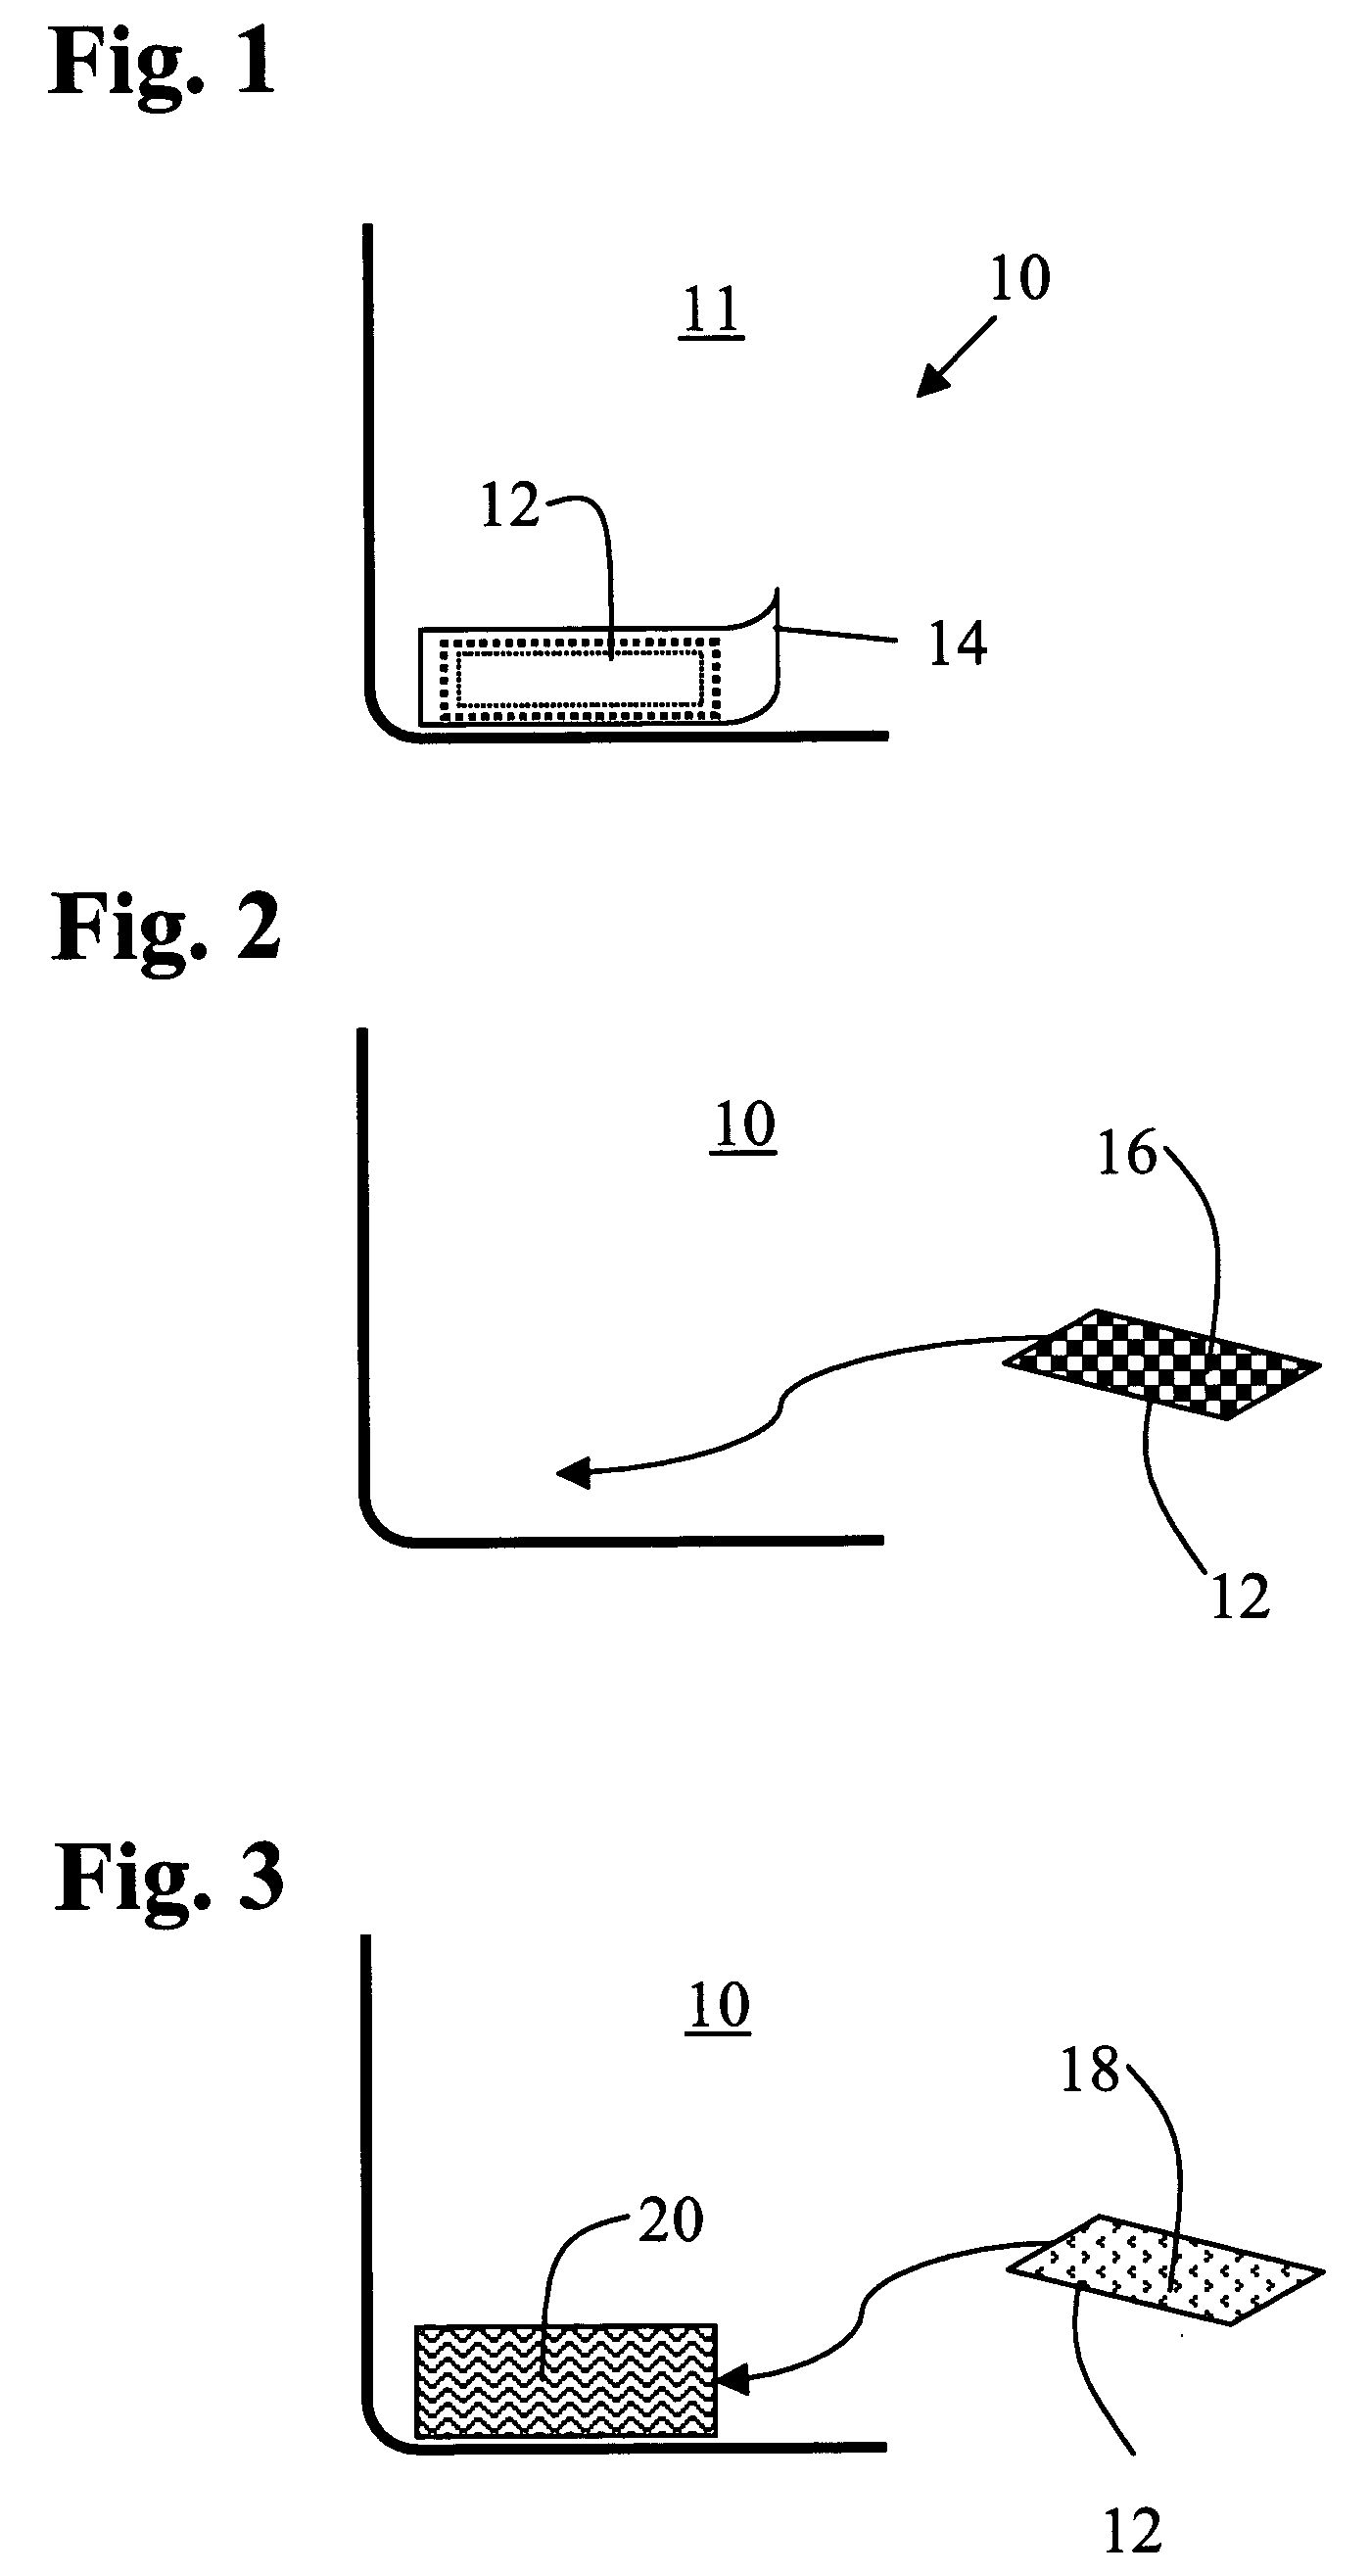 Attachment of electronic tags to surgical sponges and implements